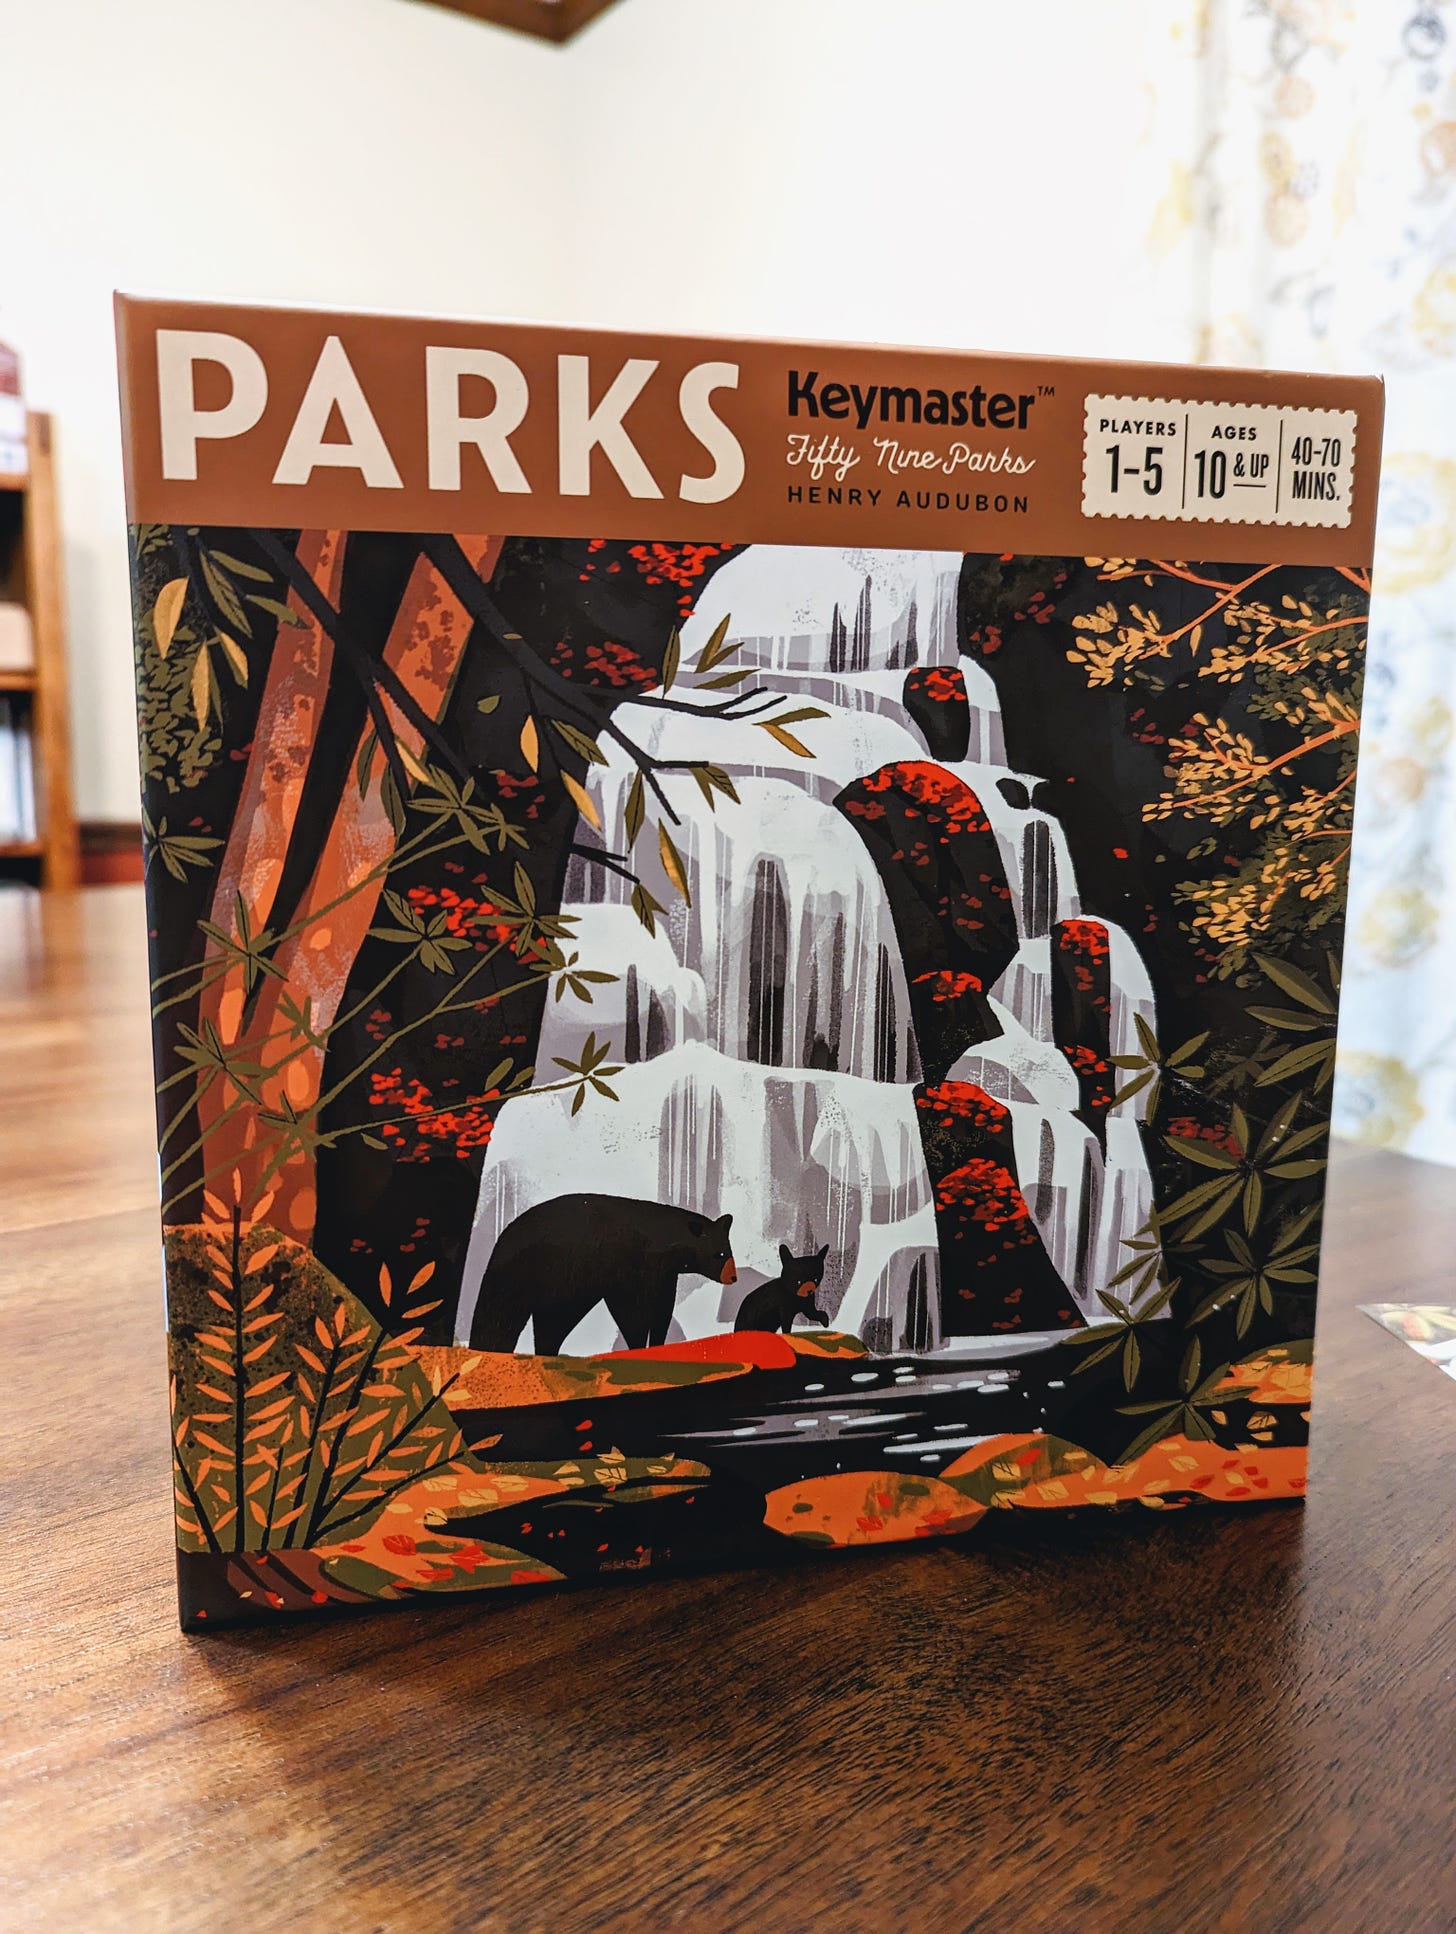 Photo of the Park board game box, depicting a rocky waterfall in earth tones.